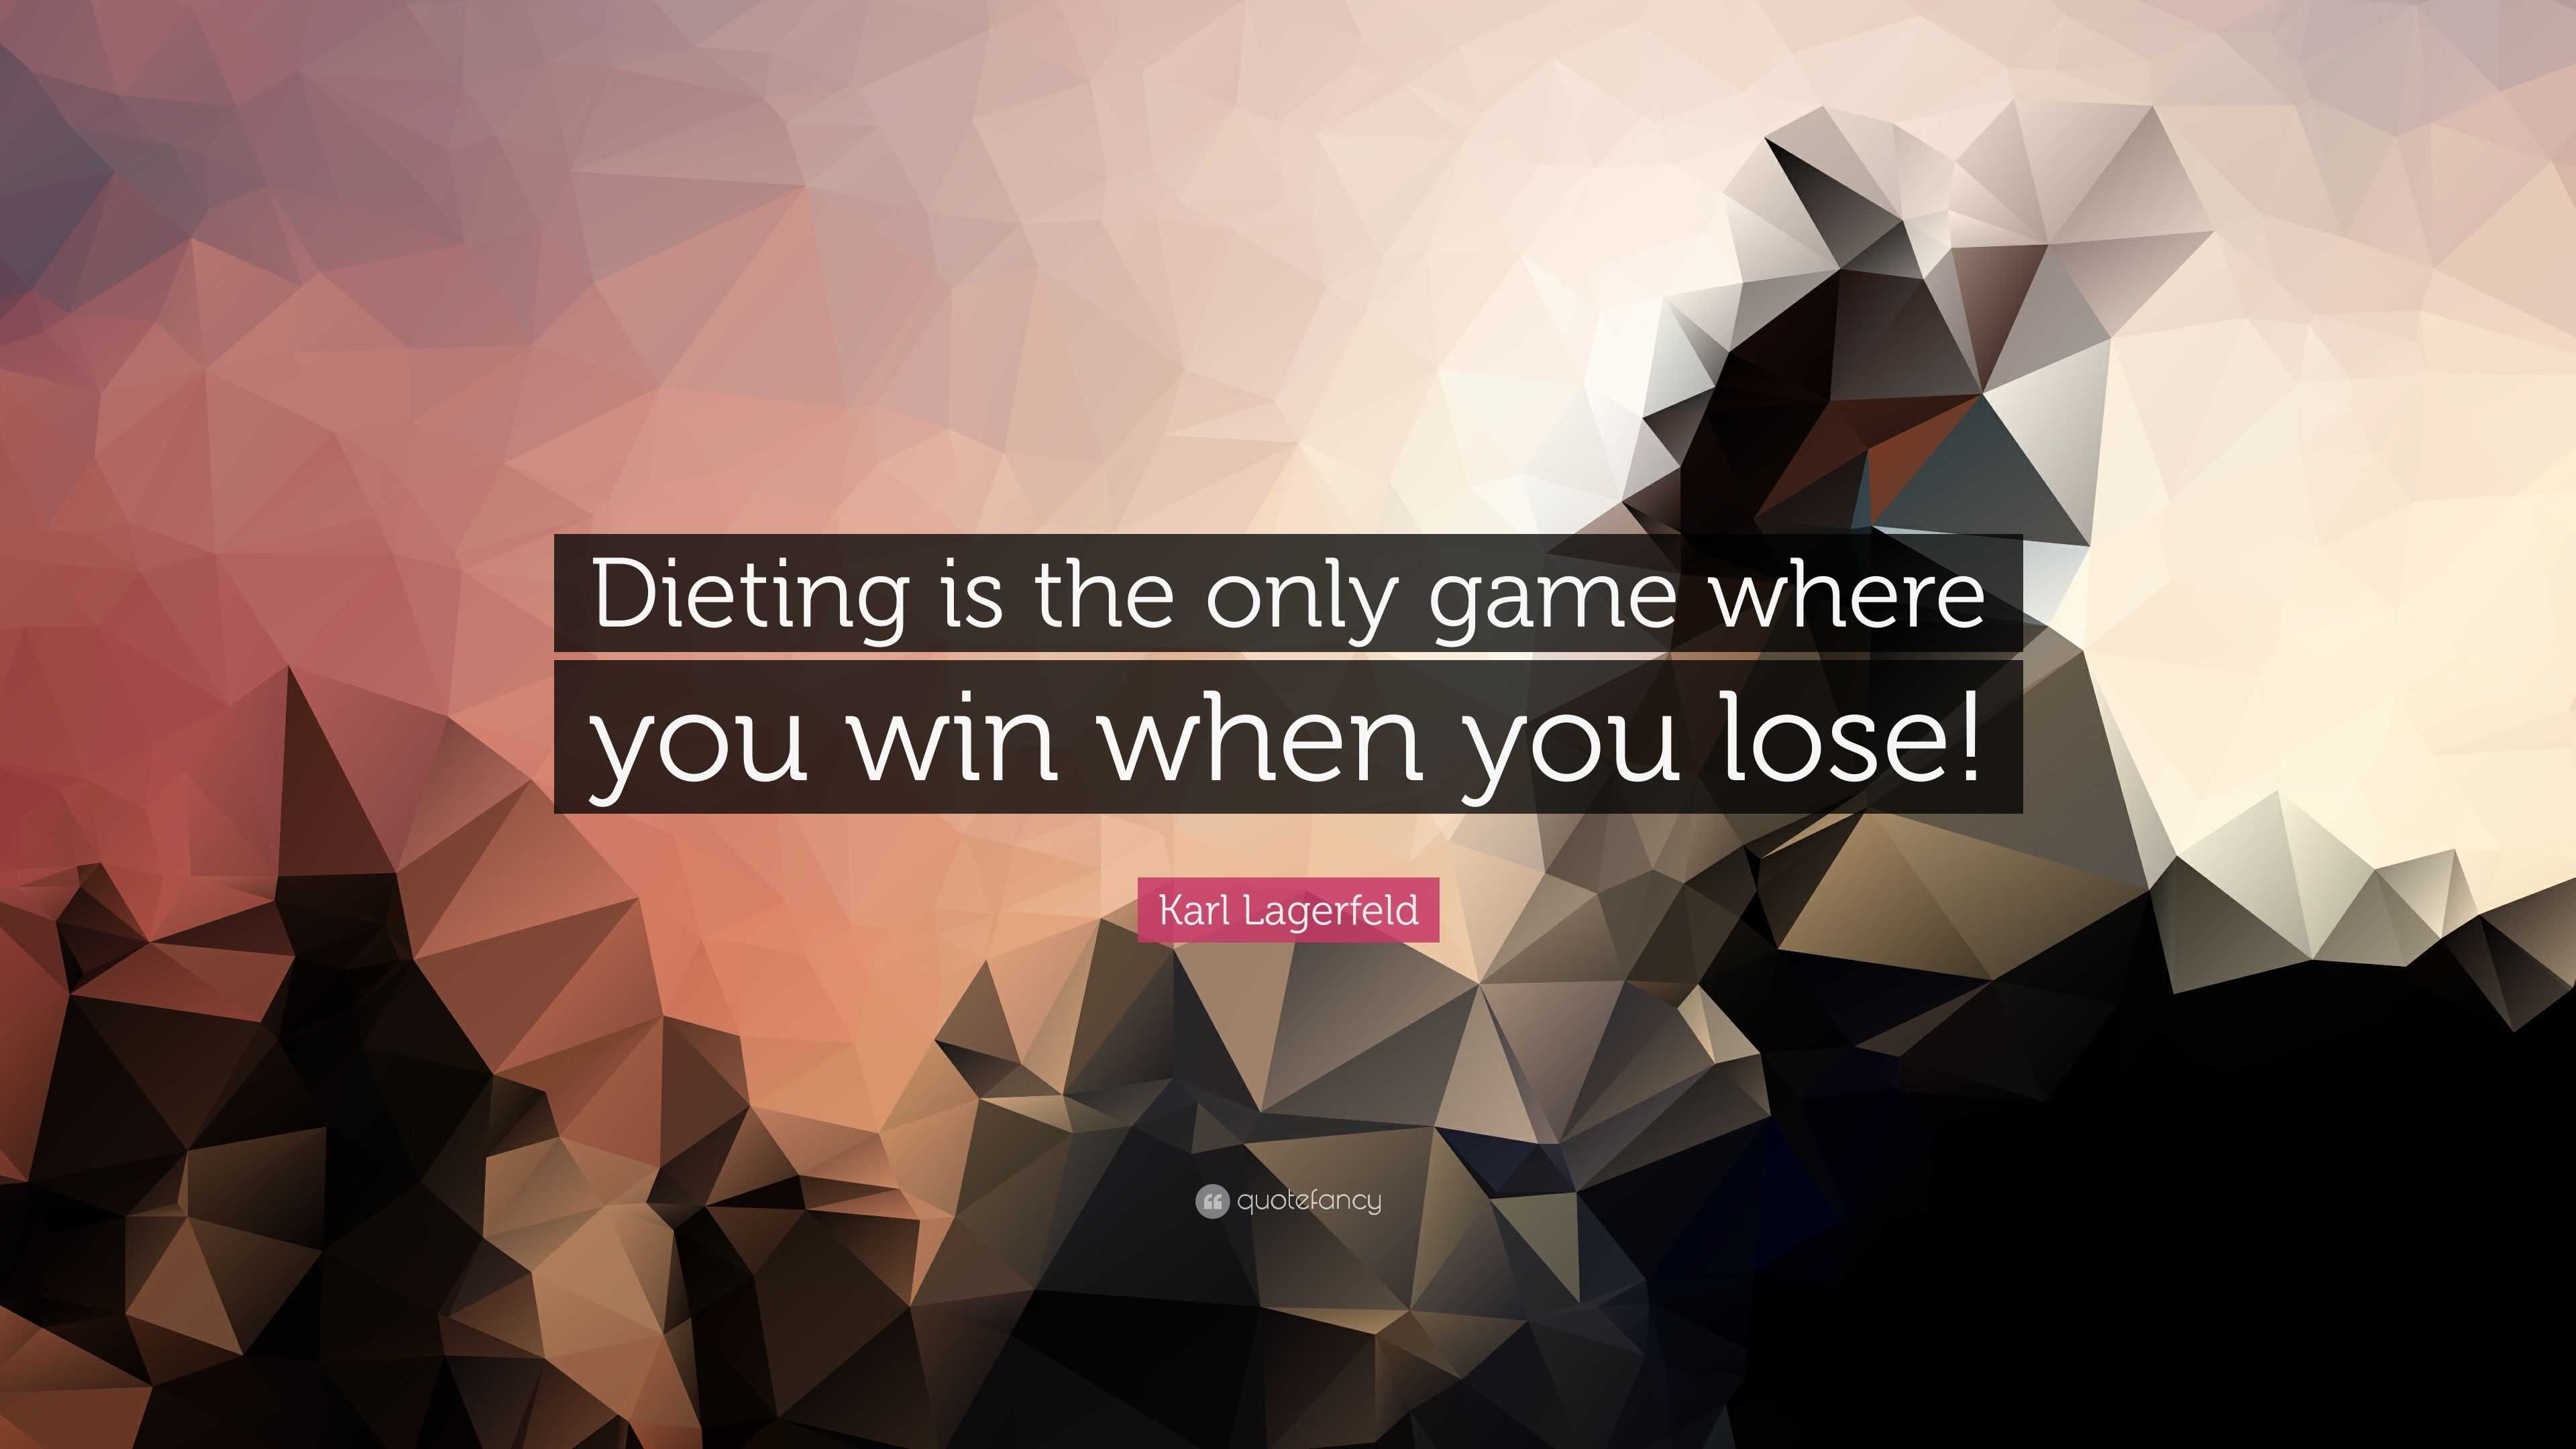 Karl Lagerfeld quote: Dieting is the only game where you win when